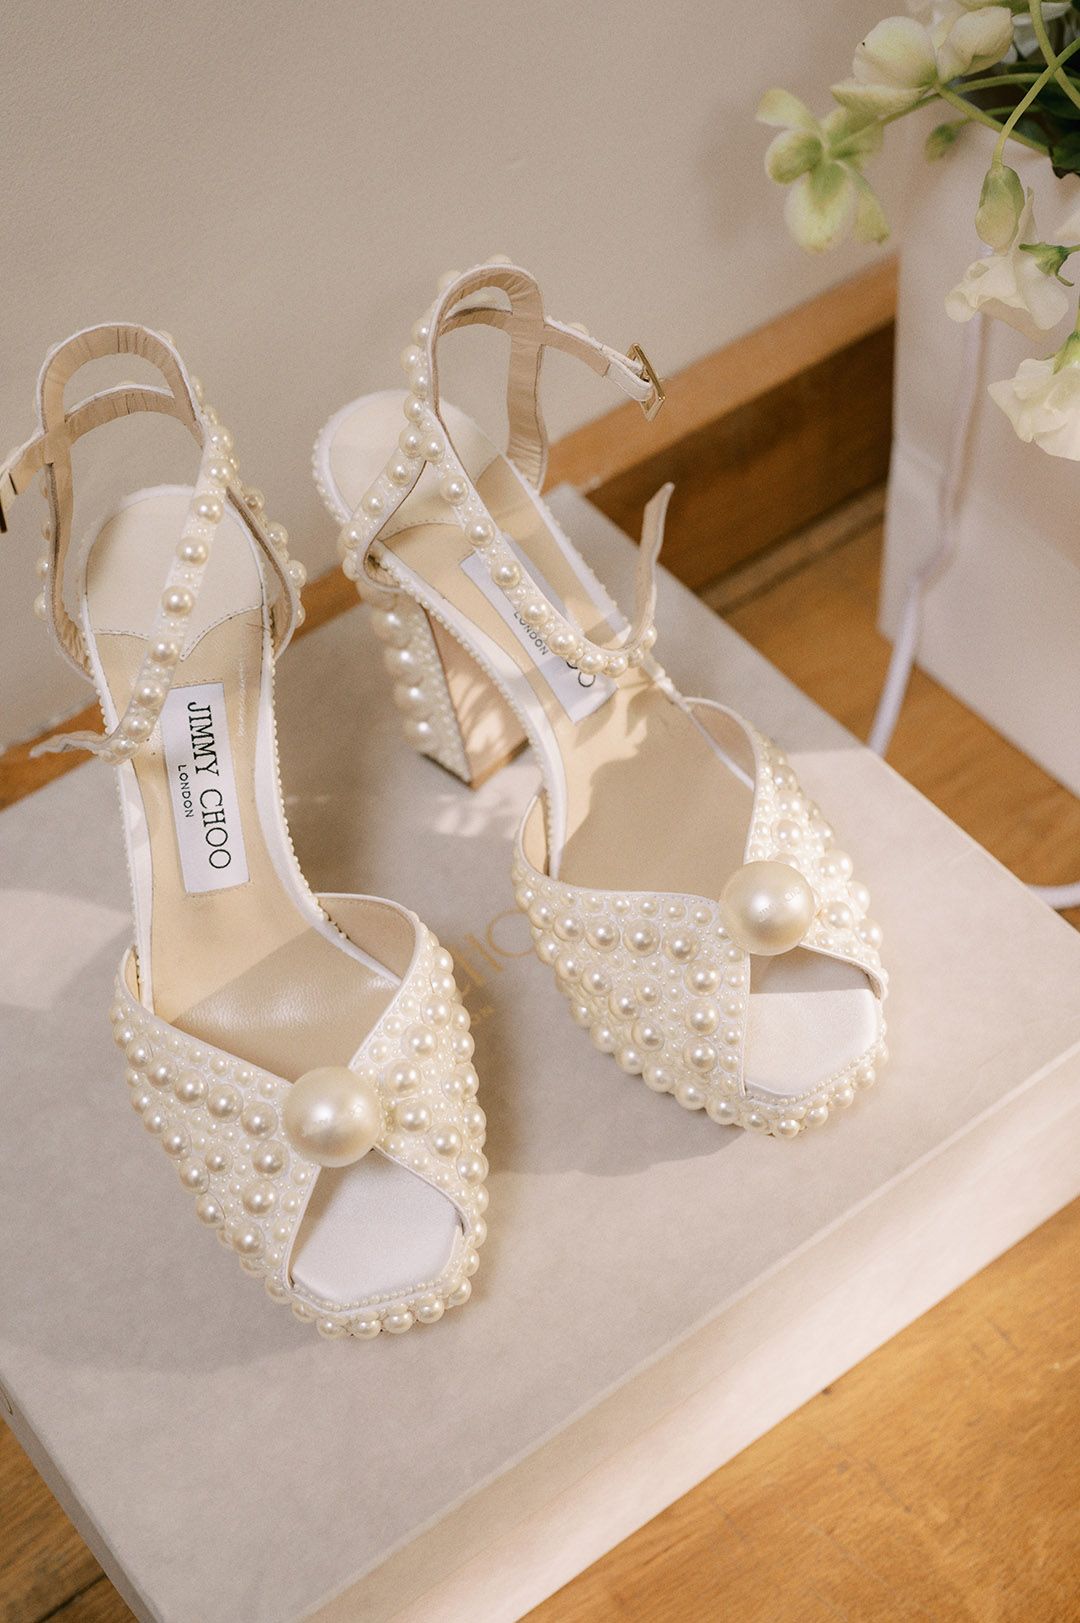 Jimmy Choo Pearl Shoes at The Tythe Barn Rustic Wedding